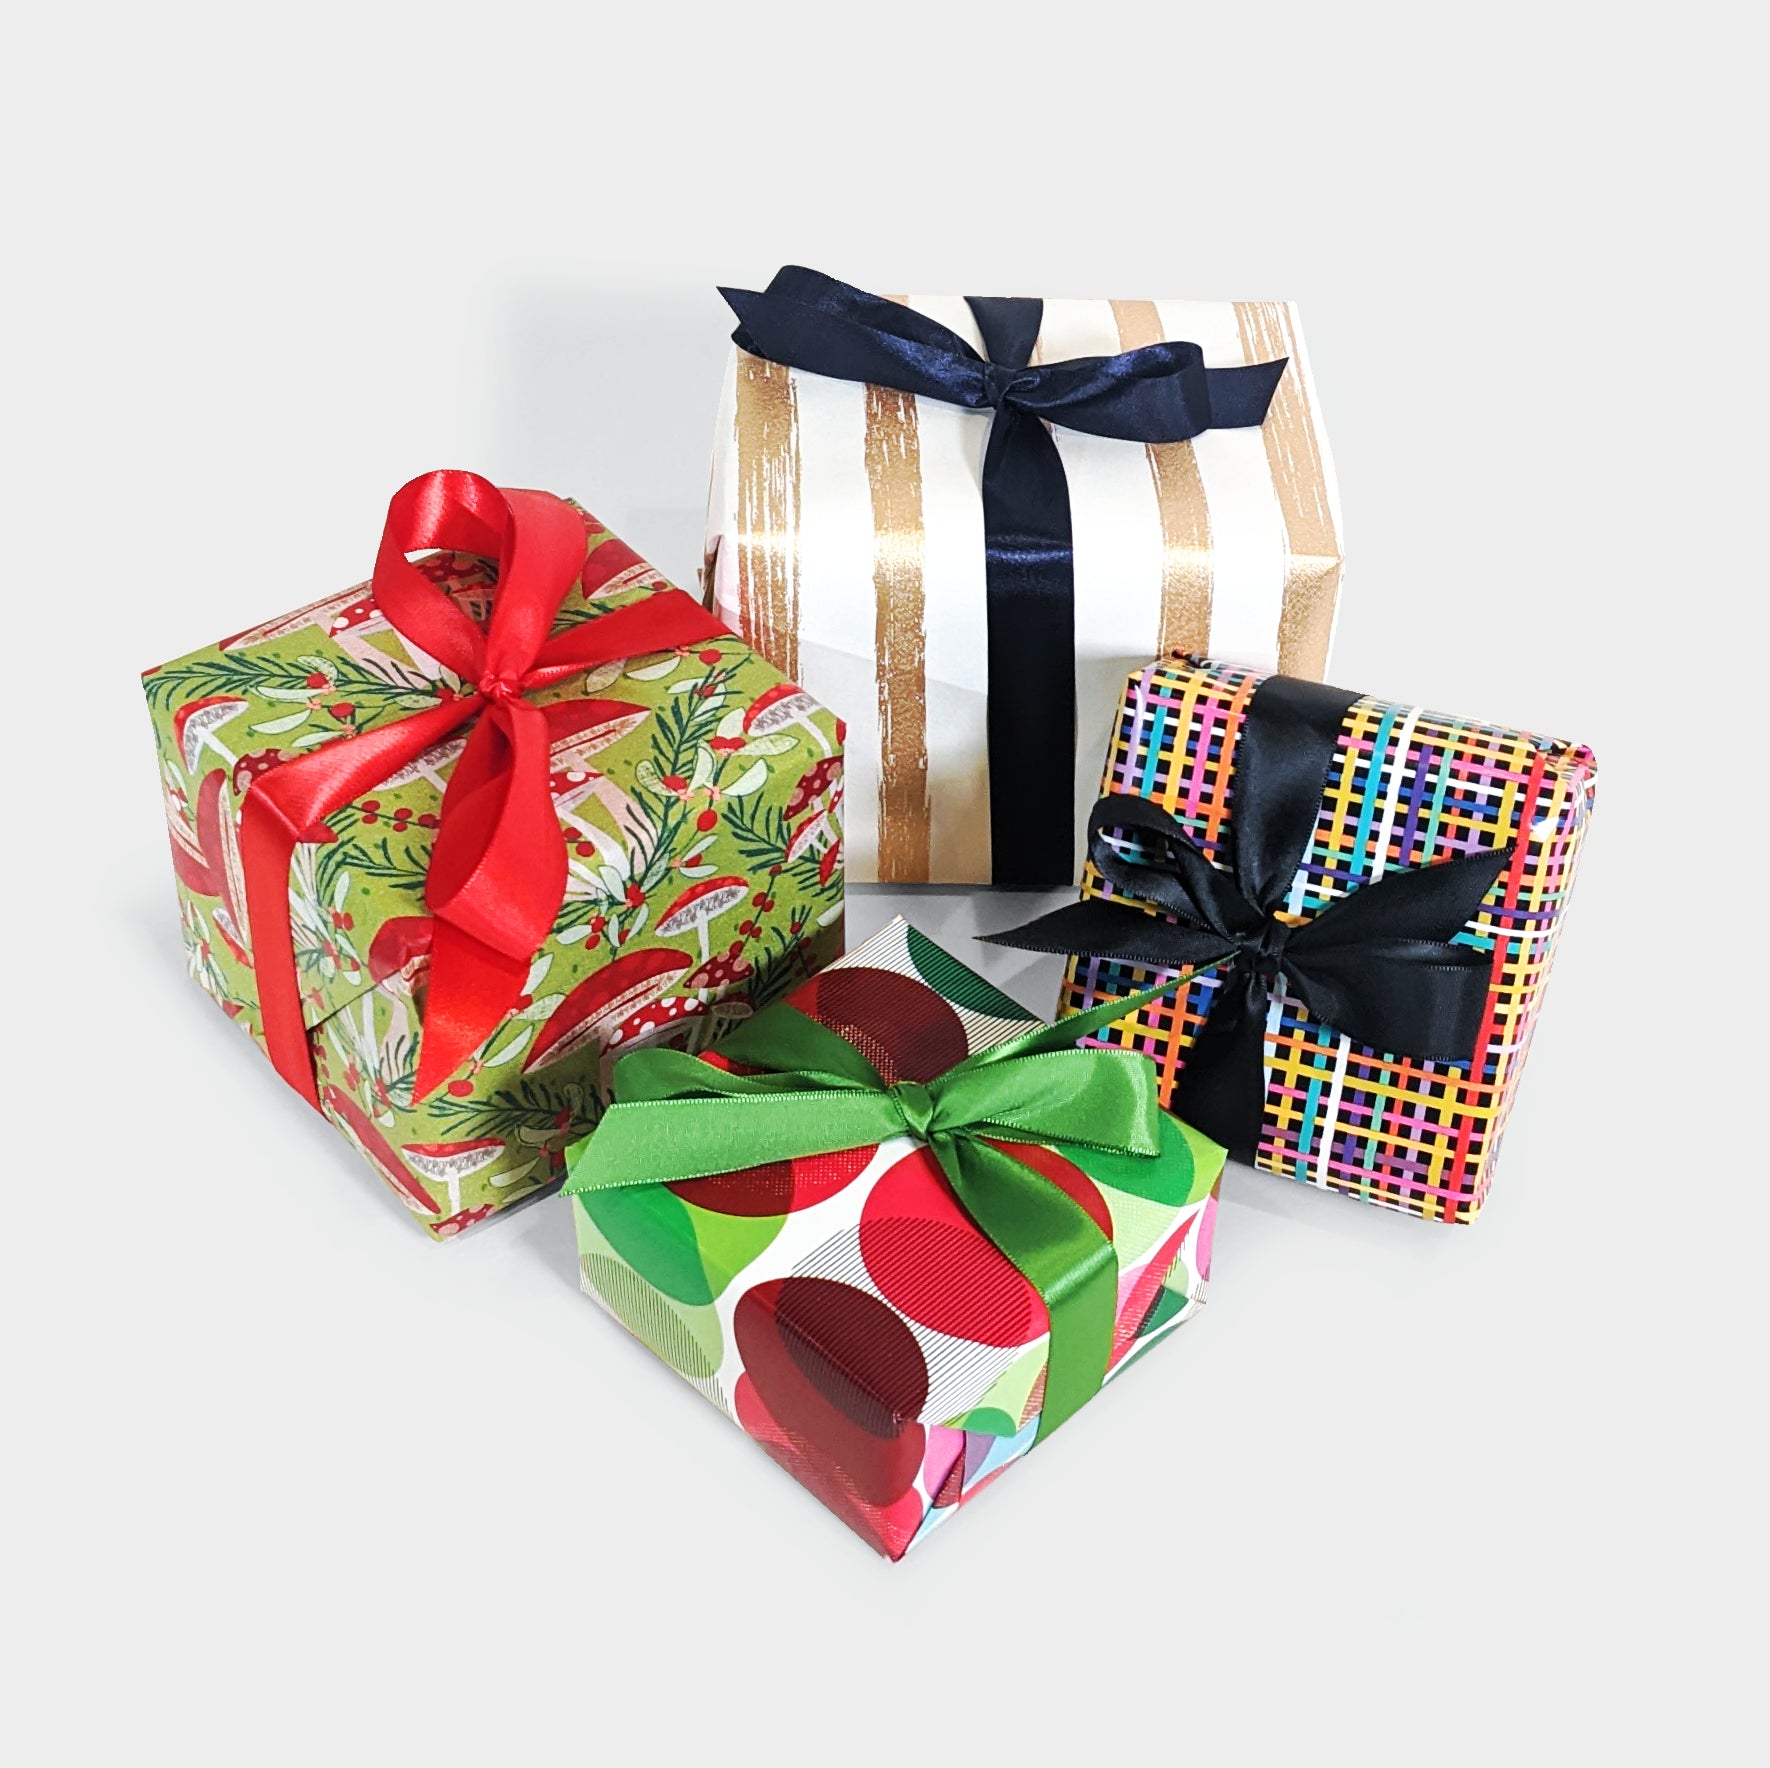 Kraft Paper Christmas Gift Wrapping Ideas - Corner of Plaid and Paisley